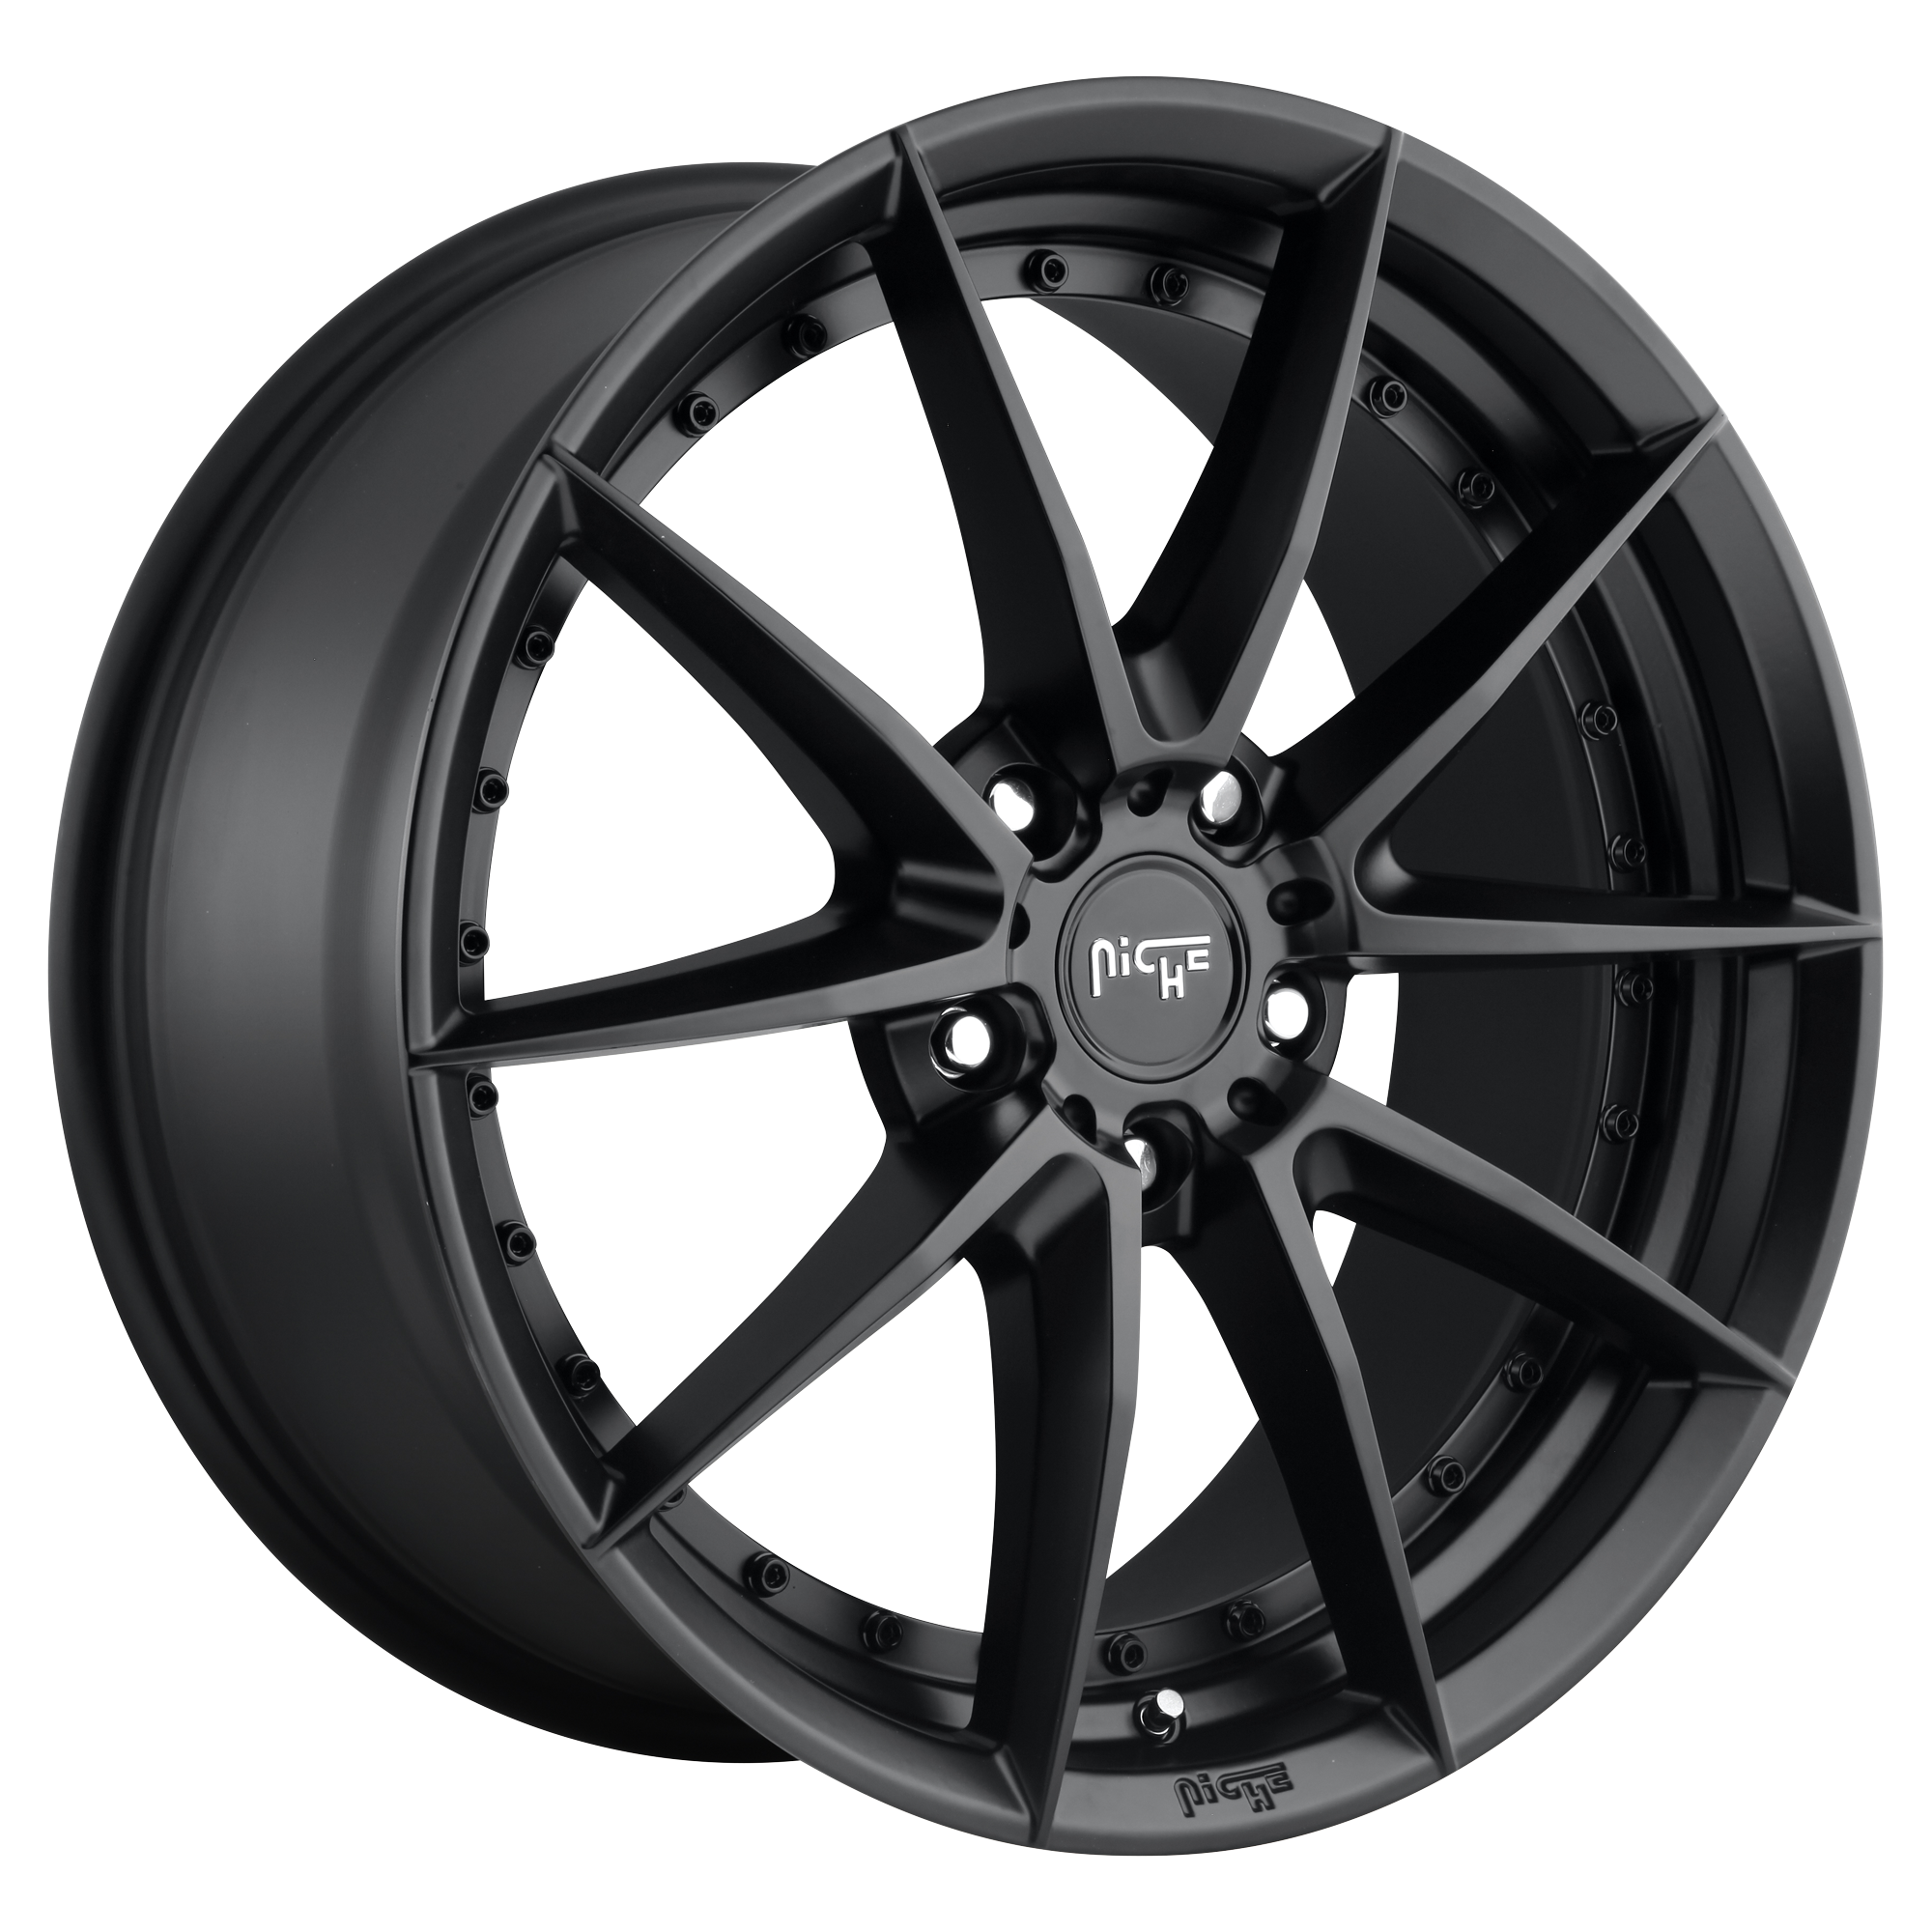 SECTOR 19x8.5 5x120.00 MATTE BLACK (35 mm) - Tires and Engine Performance